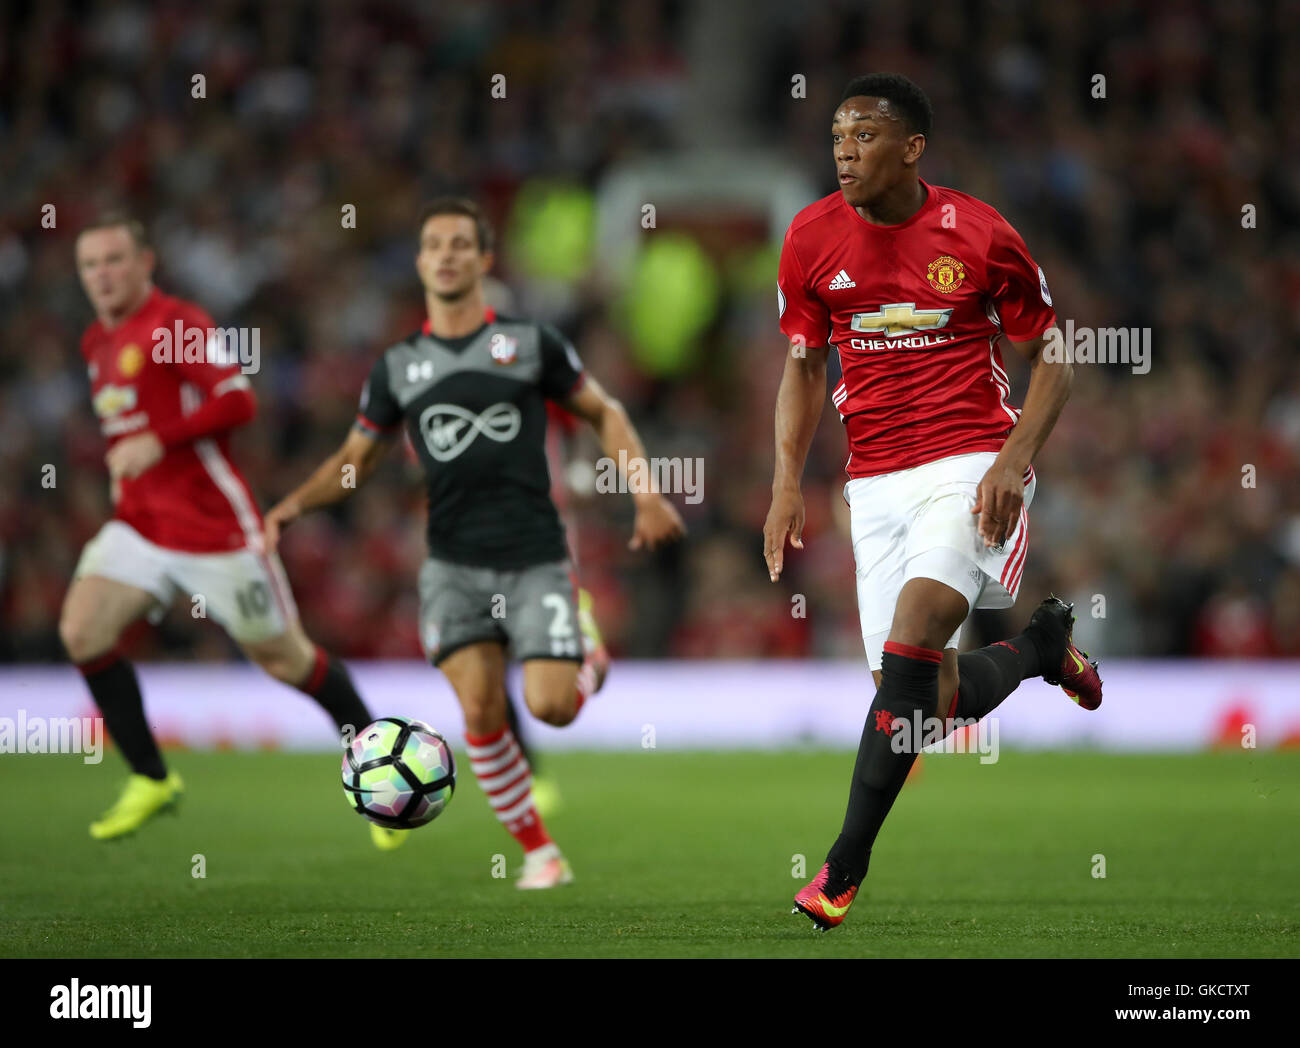 Manchester United's Anthony Martial during the Premier League match at Old Trafford, Manchester. PRESS ASSOCIATION Photo. Picture date: Friday August 19, 2016. See PA story SOCCER Man Utd. Photo credit should read: Nick Potts/PA Wire. RESTRICTIONS: No use with unauthorised audio, video, data, fixture lists, club/league logos or 'live' services. Online in-match use limited to 75 images, no video emulation. No use in betting, games or single club/league/player publications. Stock Photo